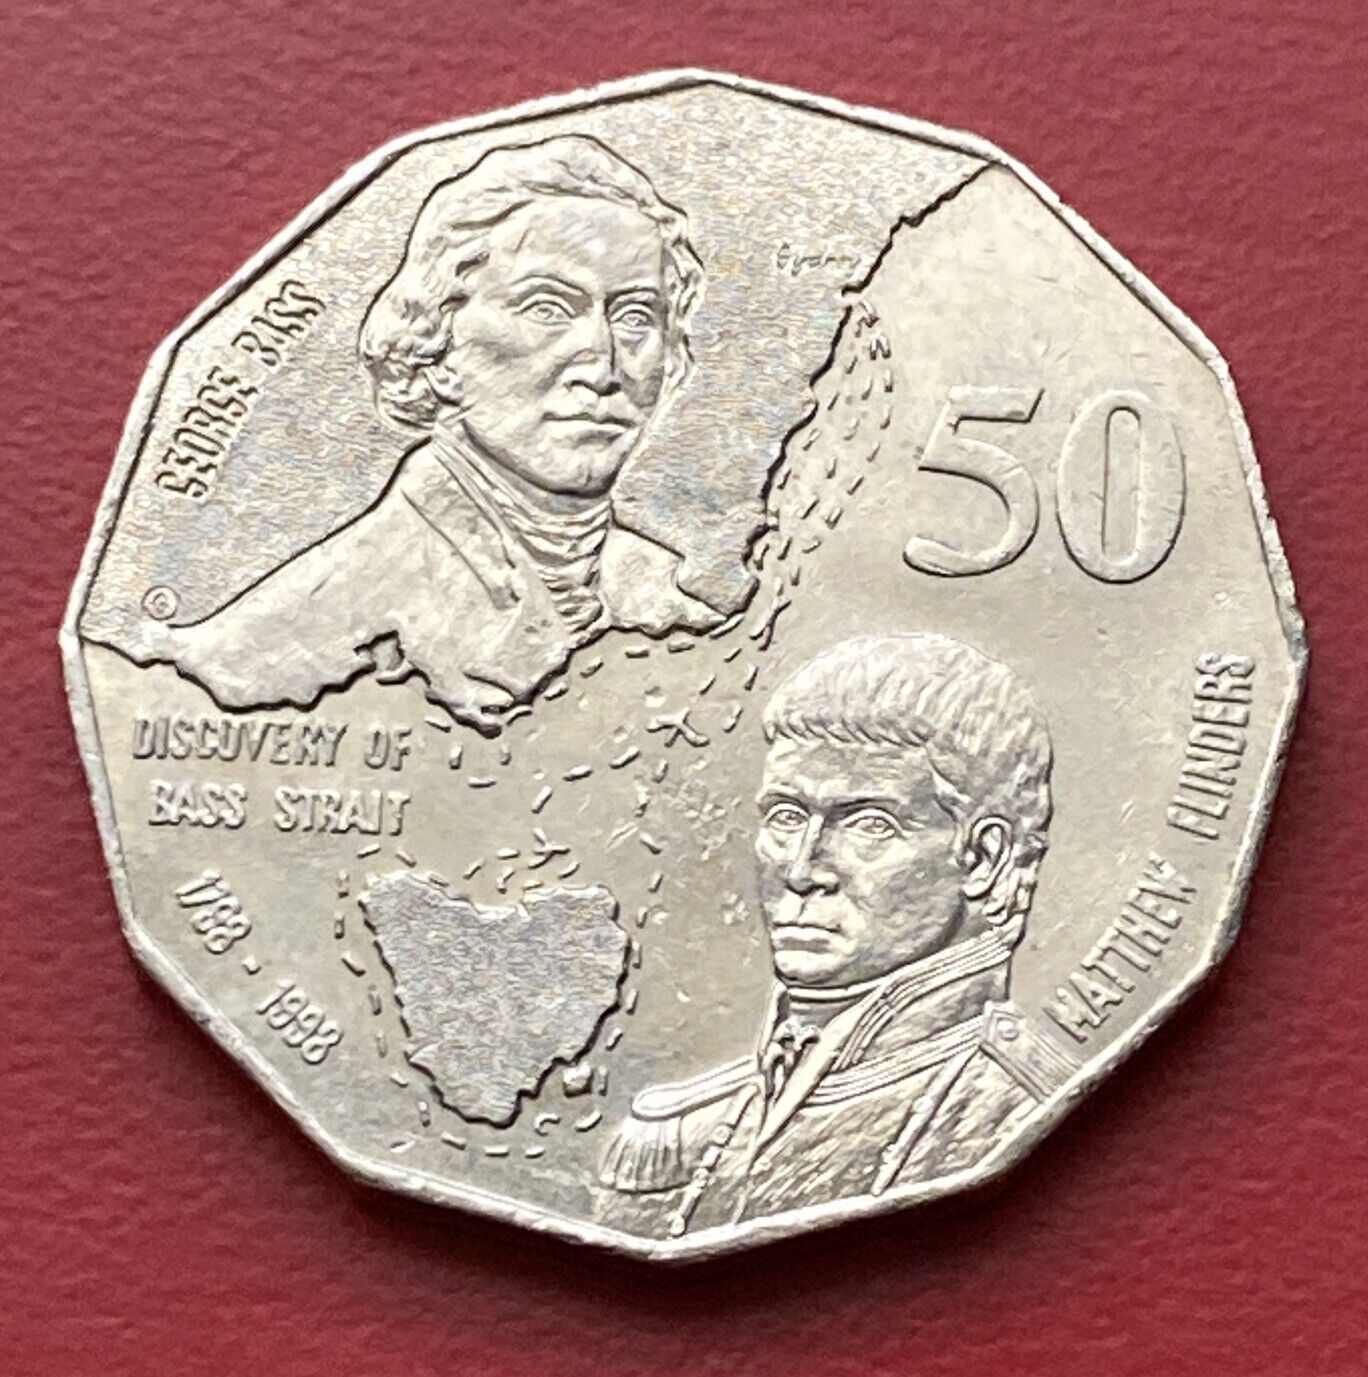 1998 50 cent coin